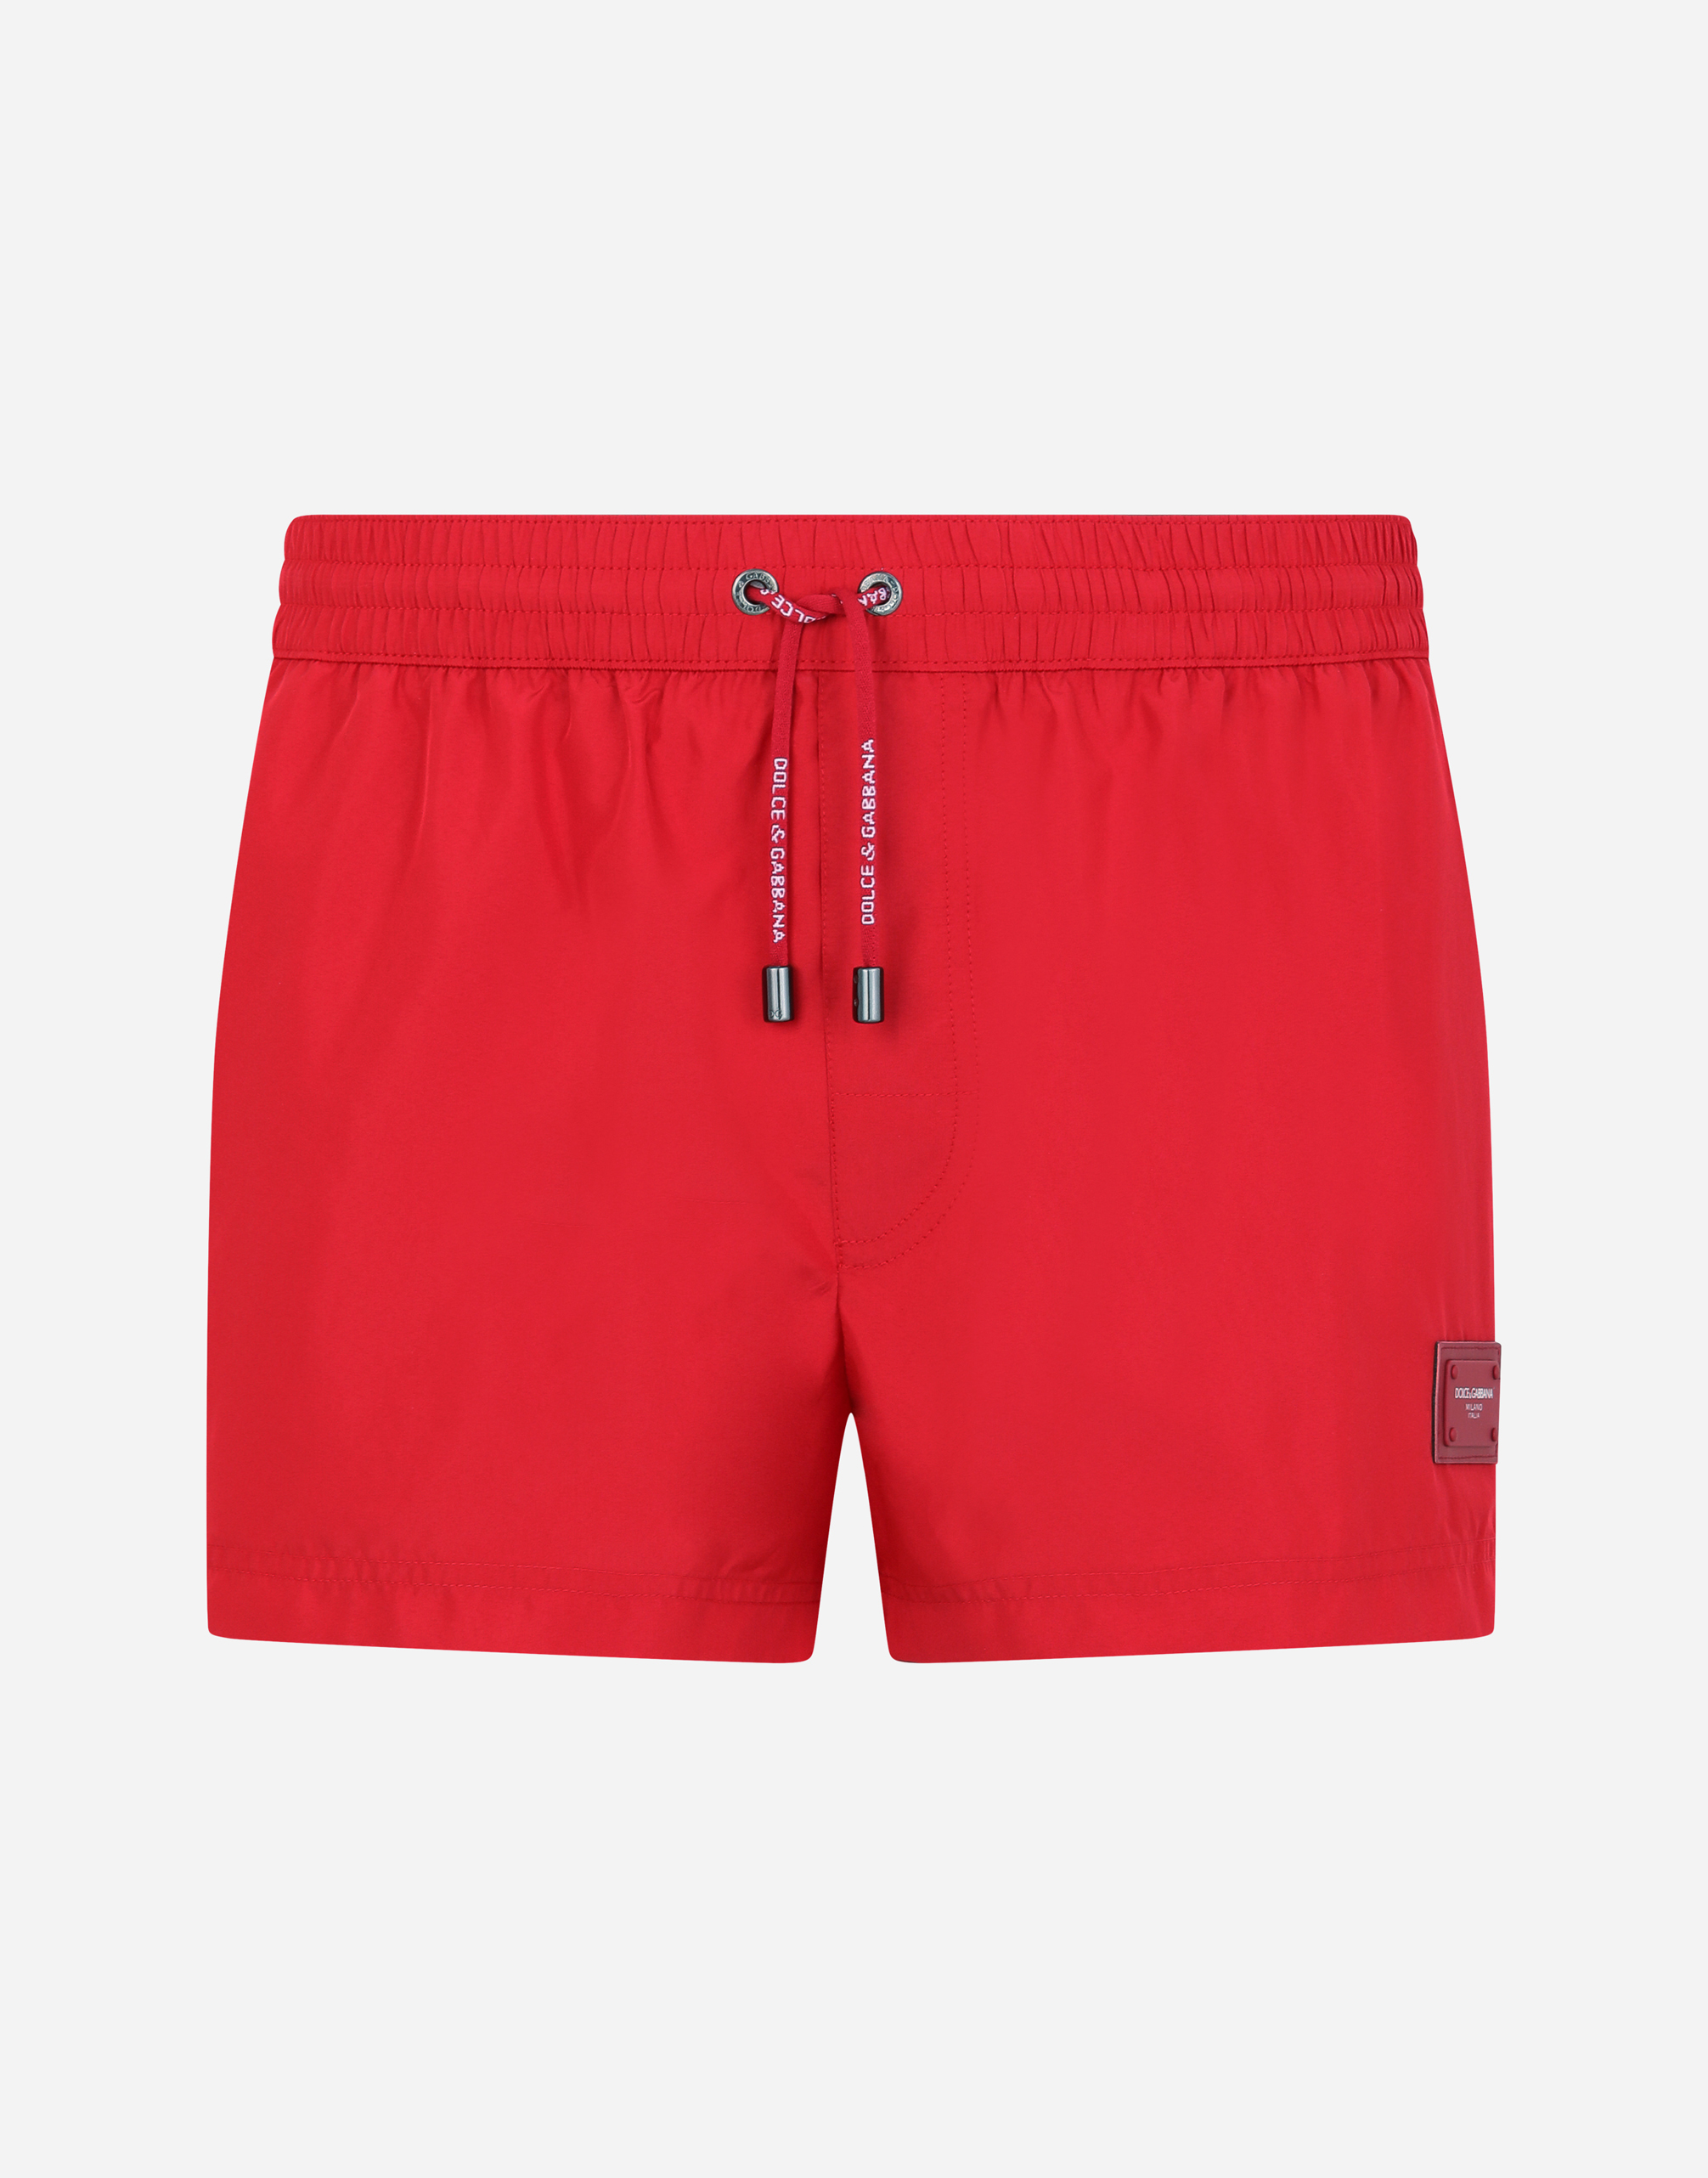 Short swim trunks with branded plate in Red